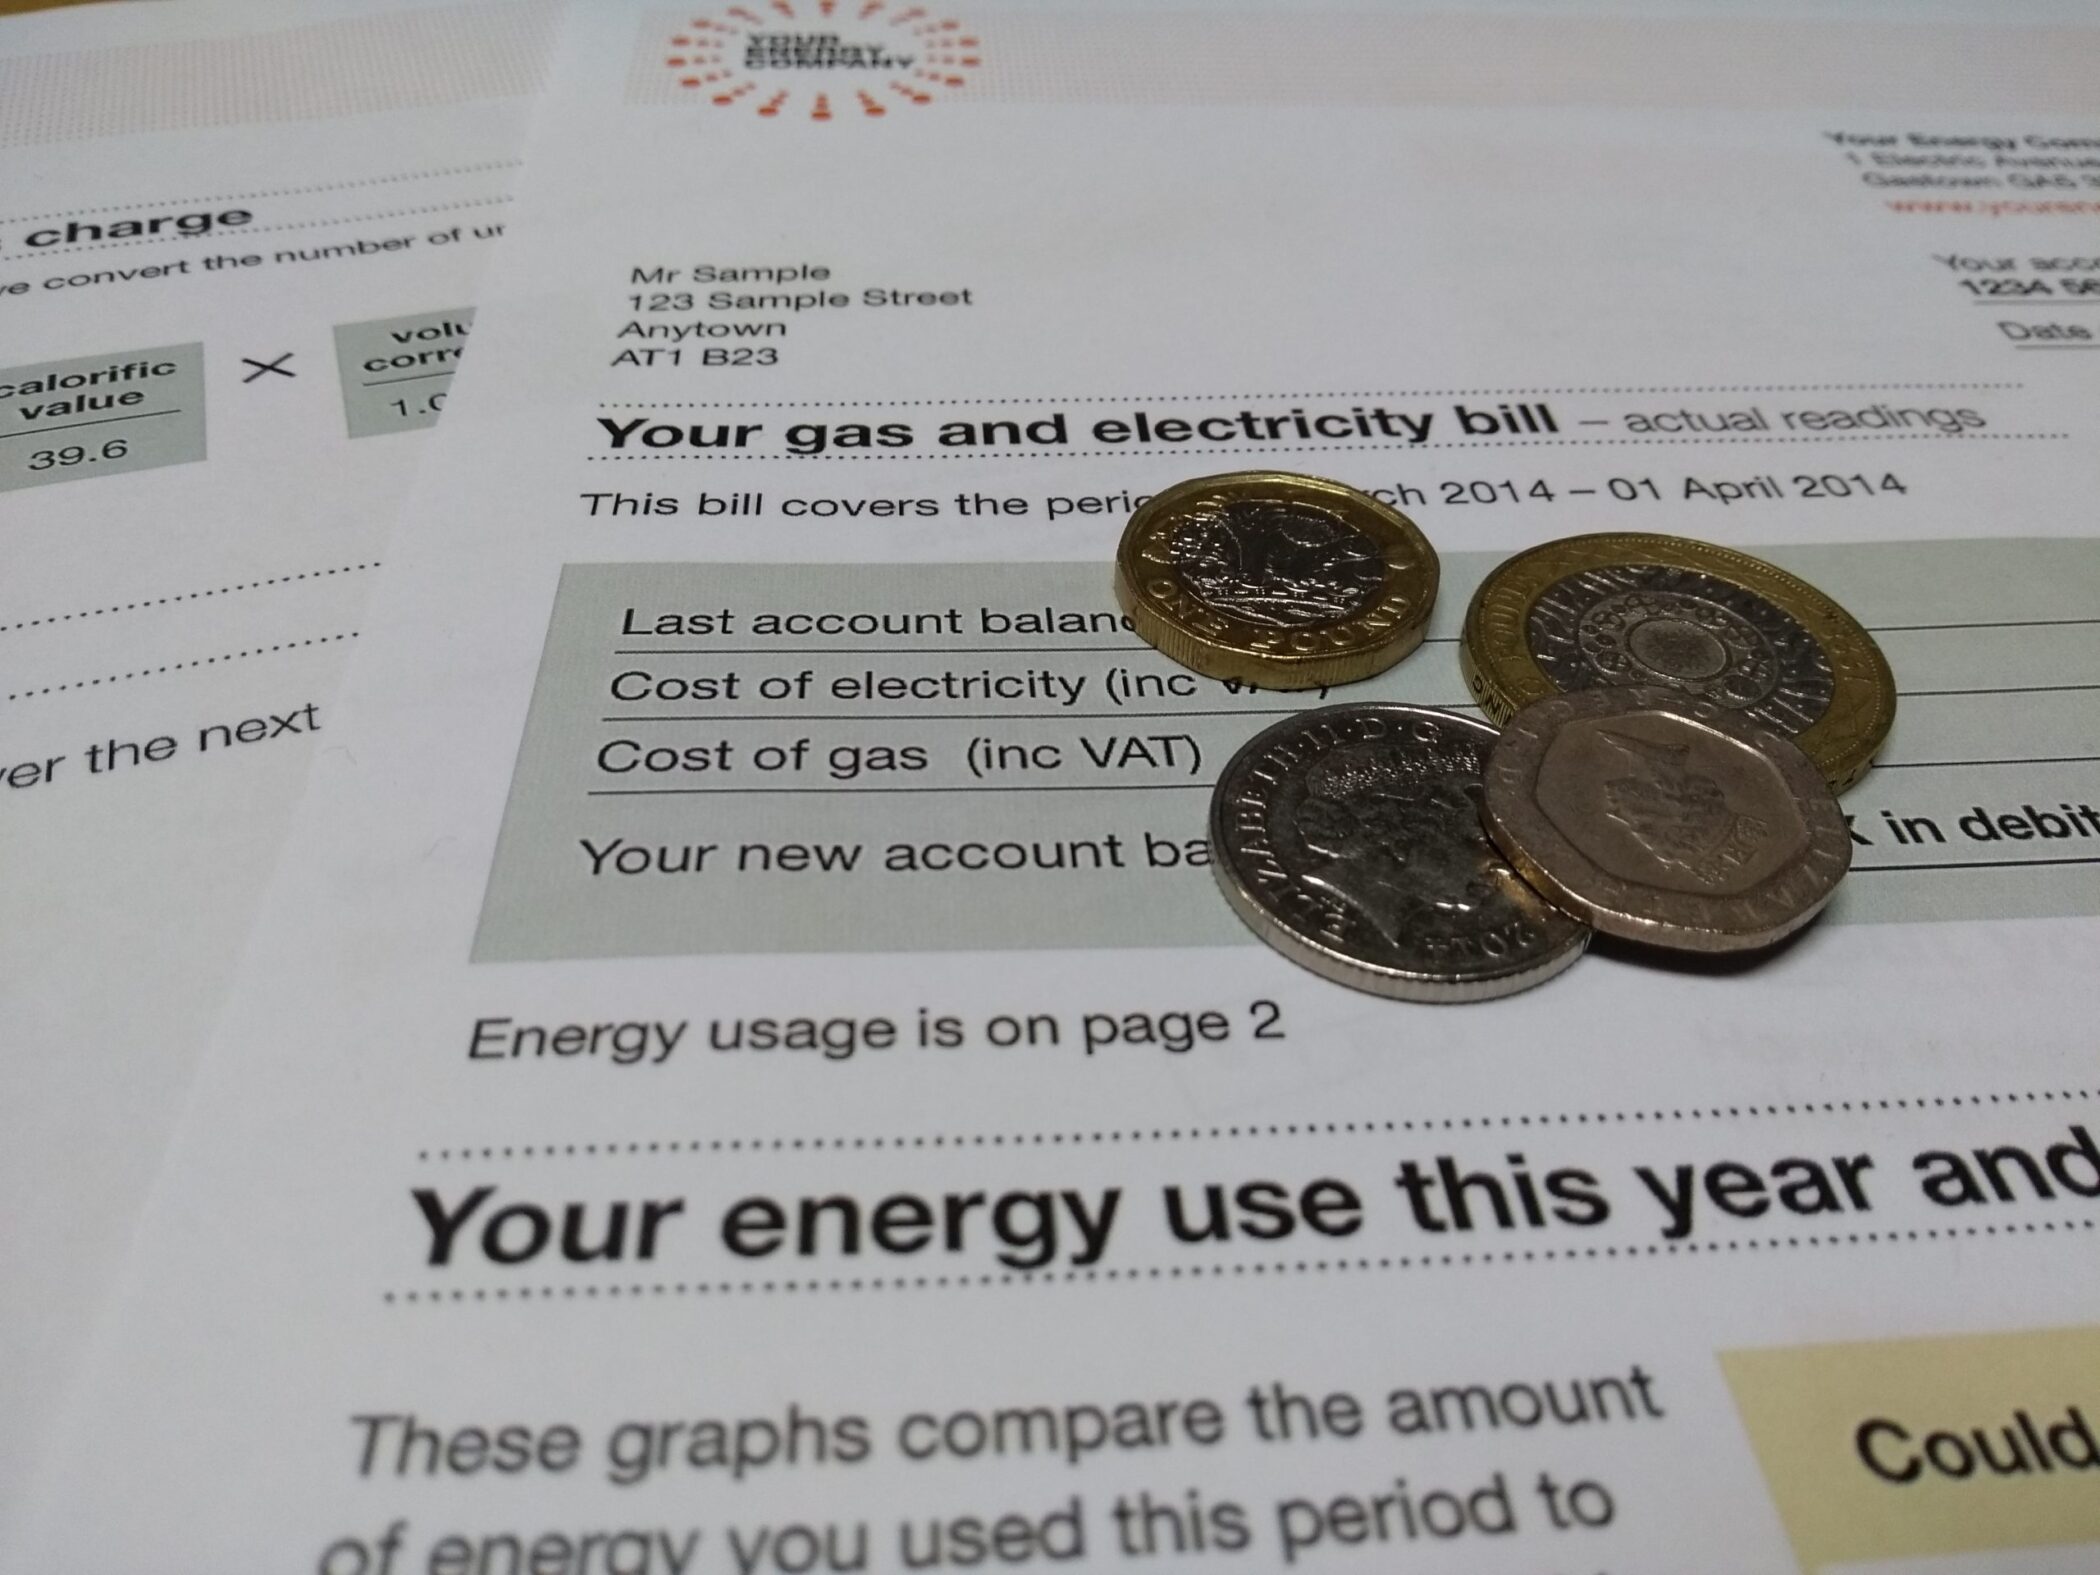 Coins on top of energy bill